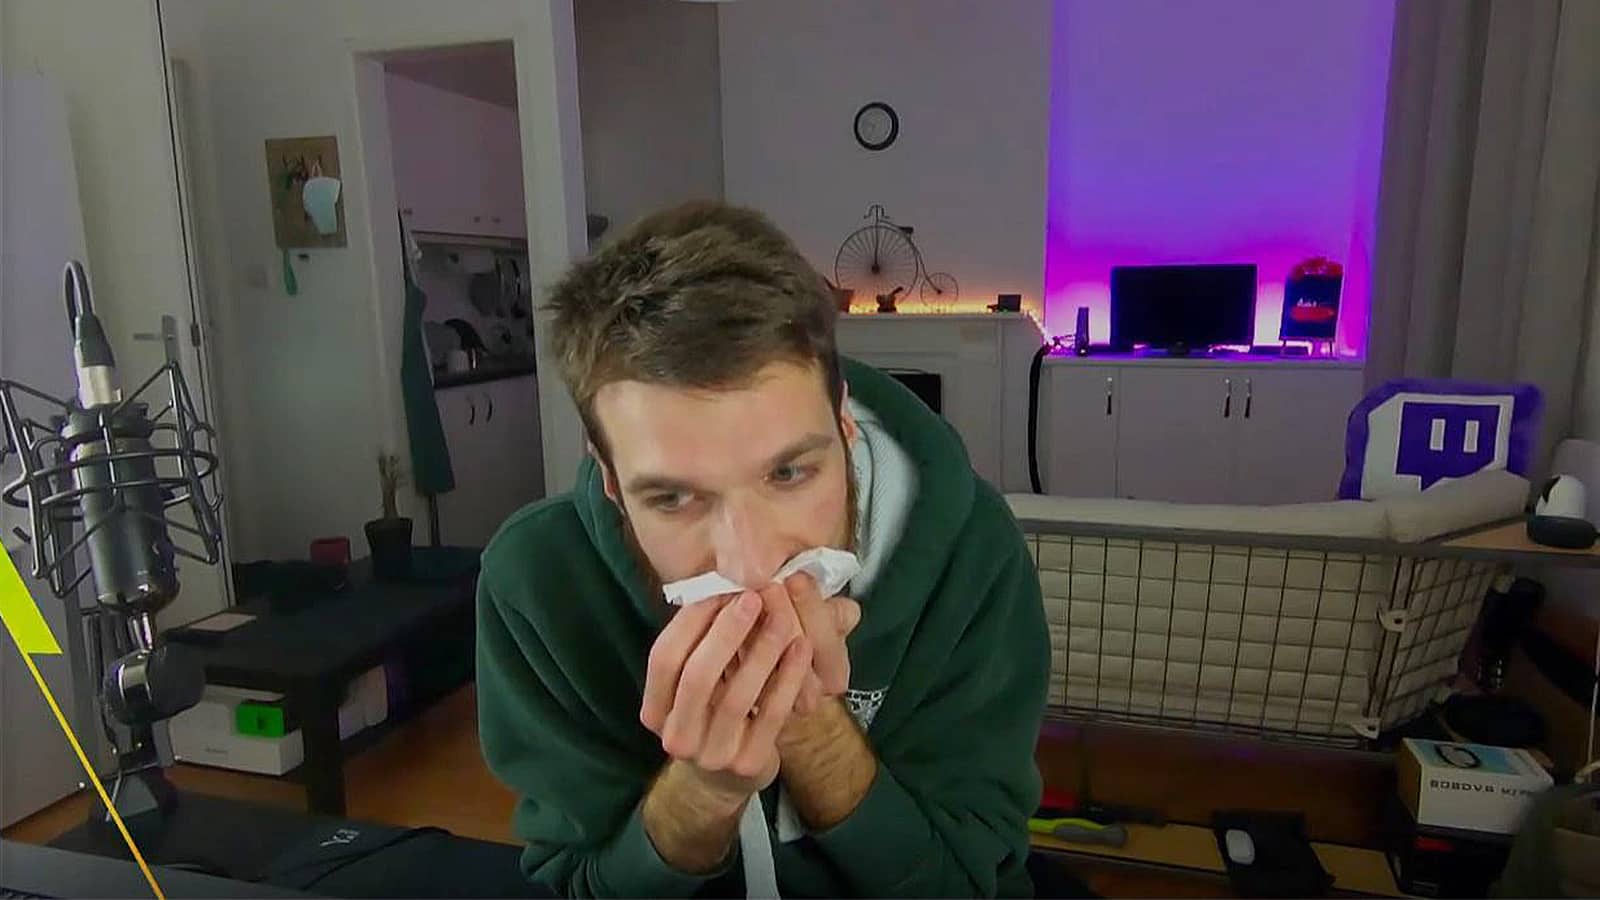 Twitch streamer breaks mouth in VR game accident